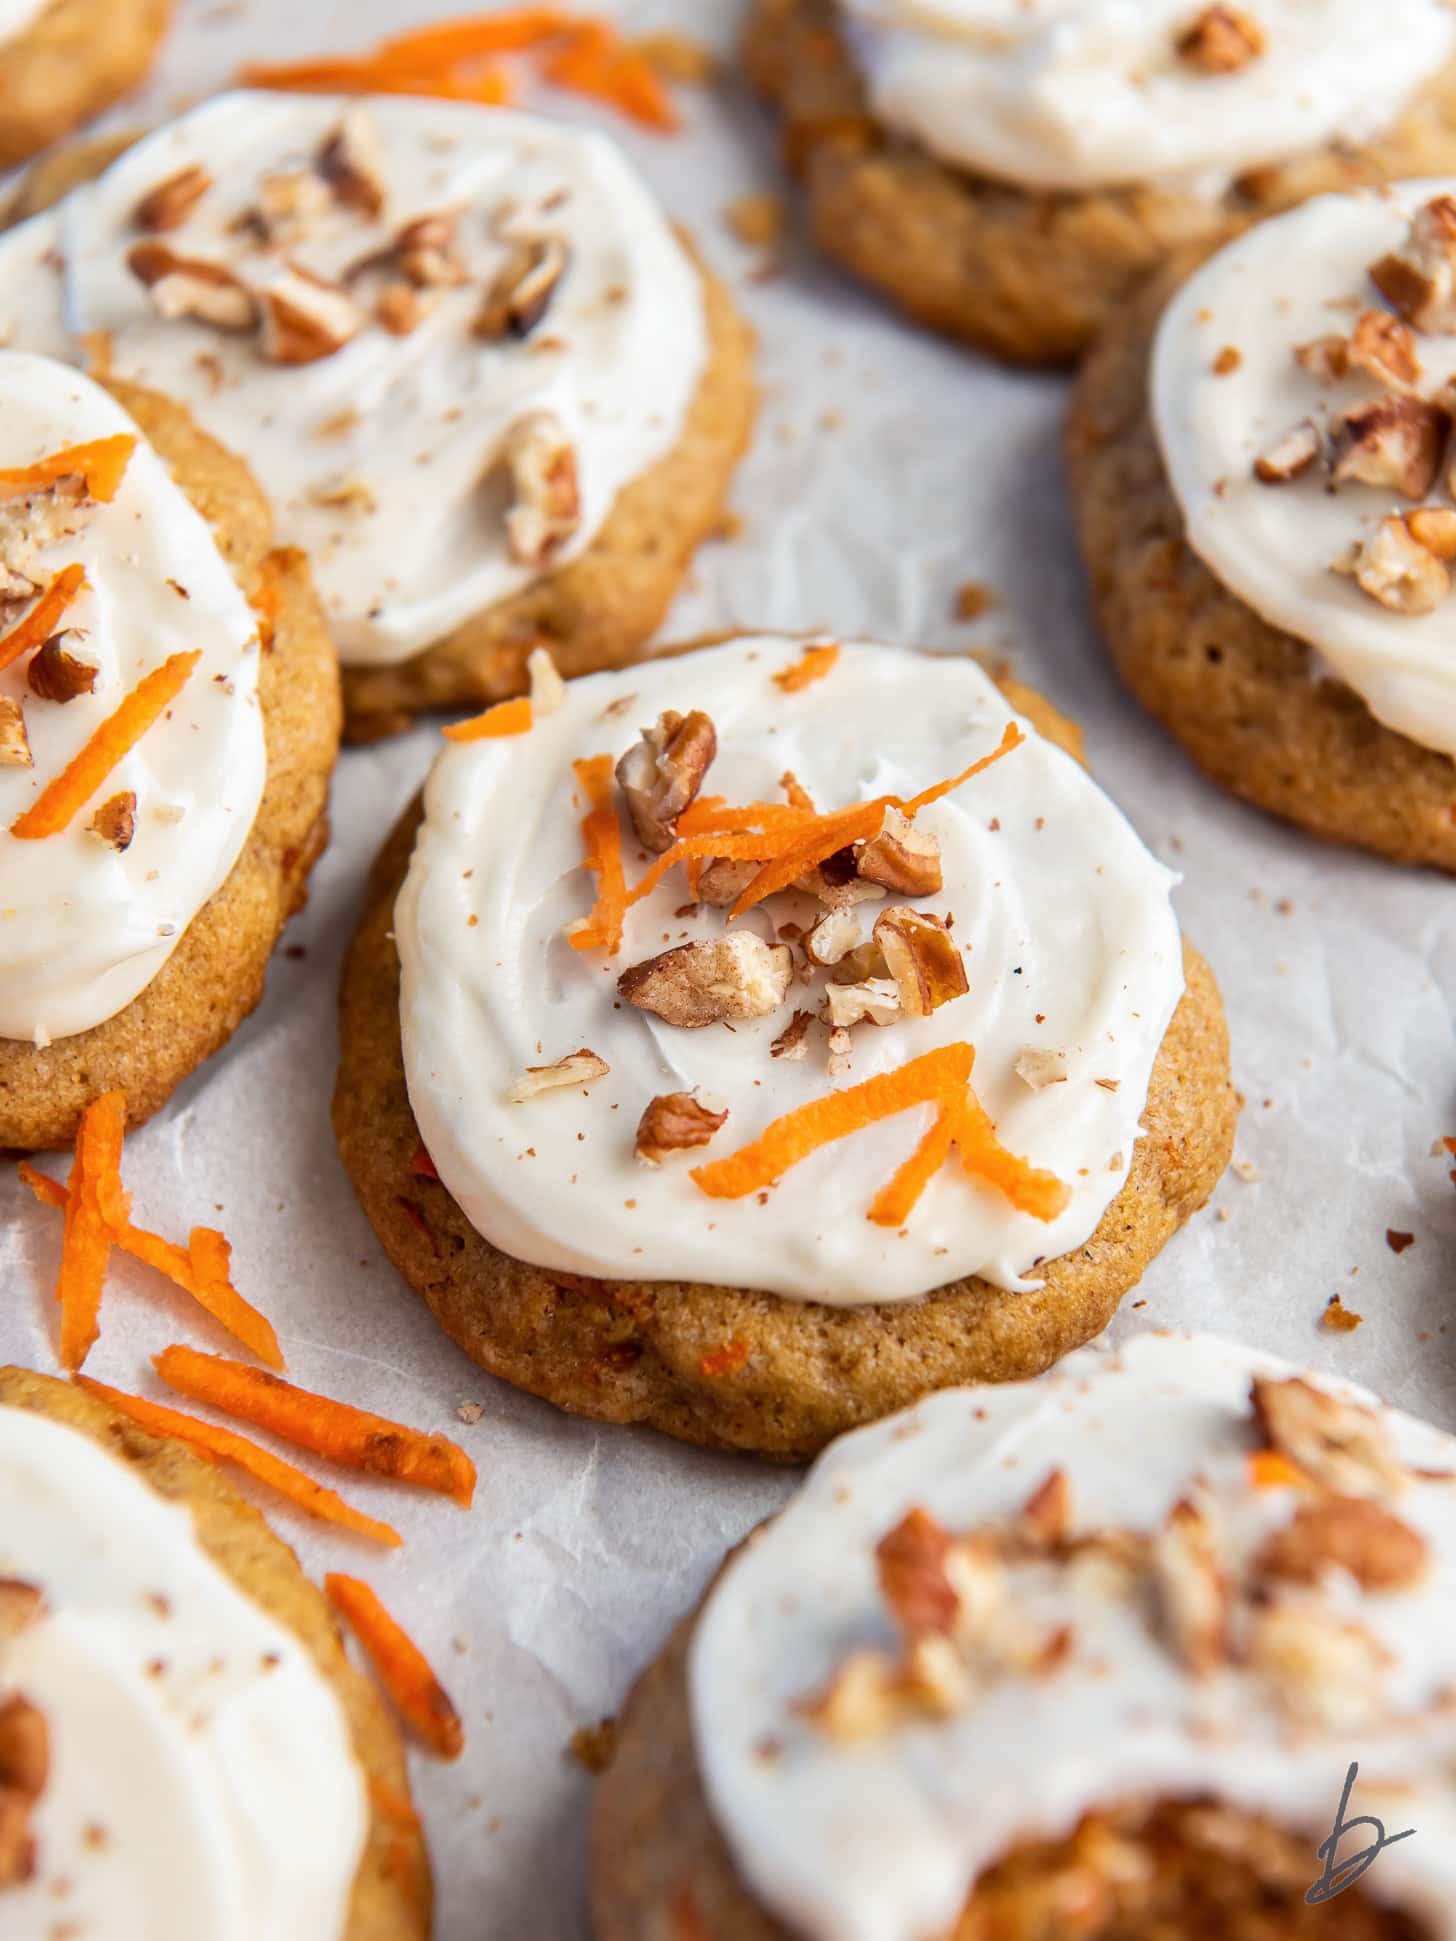 carrot cake cookie with cream cheese frosting and walnut garnish.